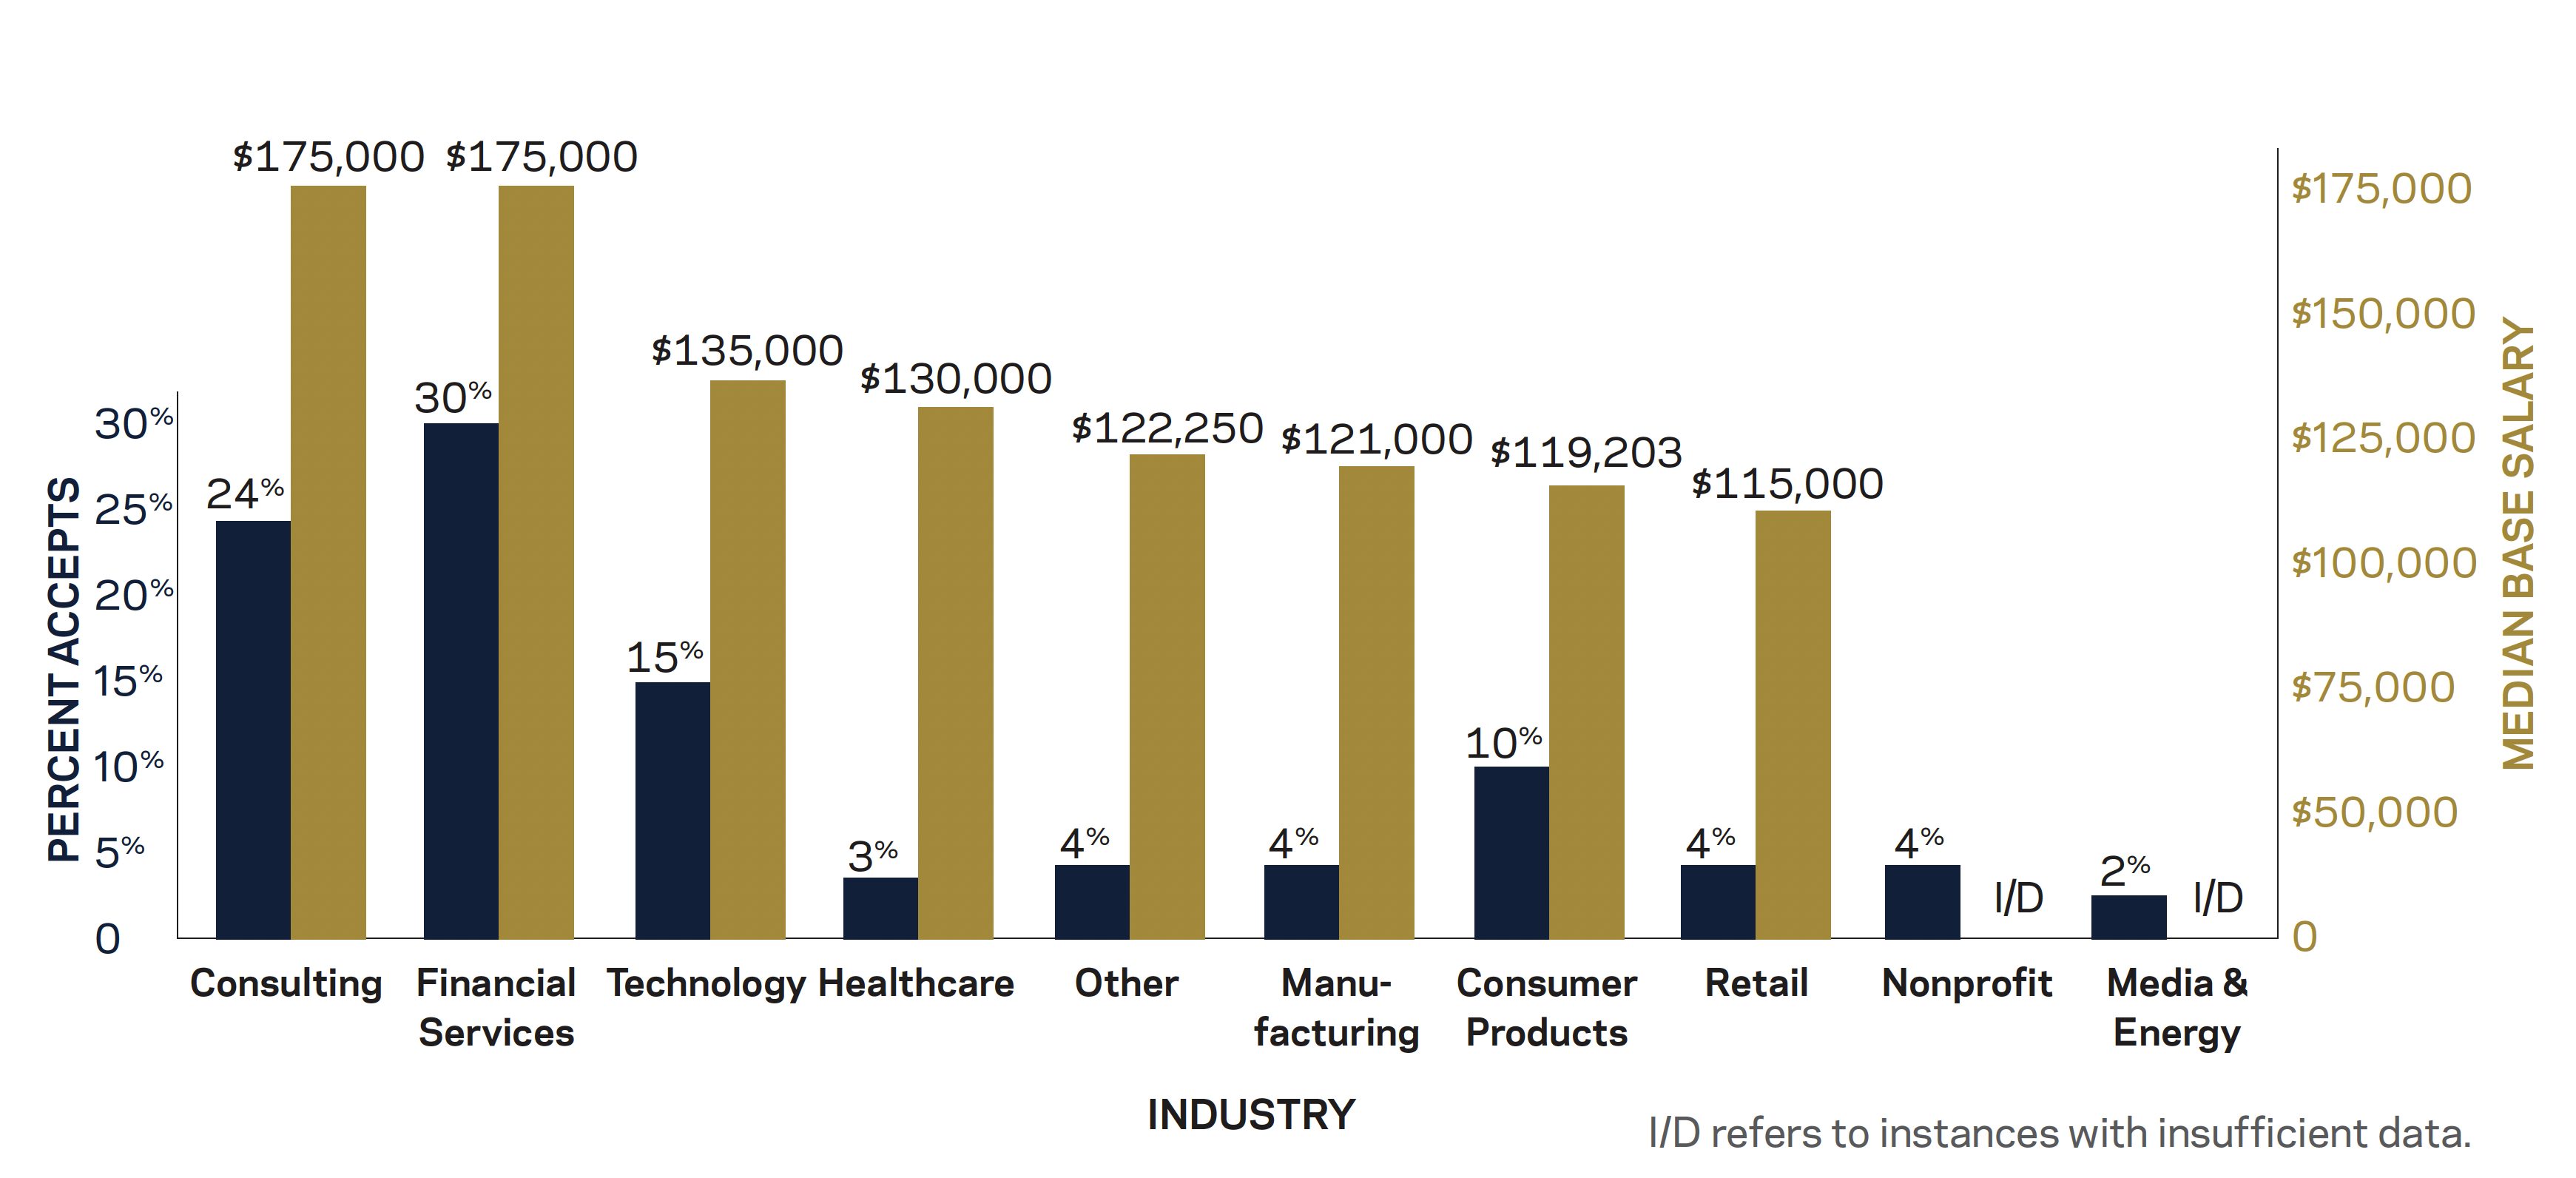 graph showing percent accepts and median base salary by industry. Consulting: 24%, $275,000. Financial Services: 30%, $175,000. Technology: 15%, $135,000. Healthcare: 3%, $130,000. Other: 4%, $122,250. Manufacturing: 4%, $121,000. Consumer Products: 10%, $119,203. Retail: 4%, $115,000. Nonprofit: 4%, insufficient data. Media and Energy: 2%, insufficient data. 